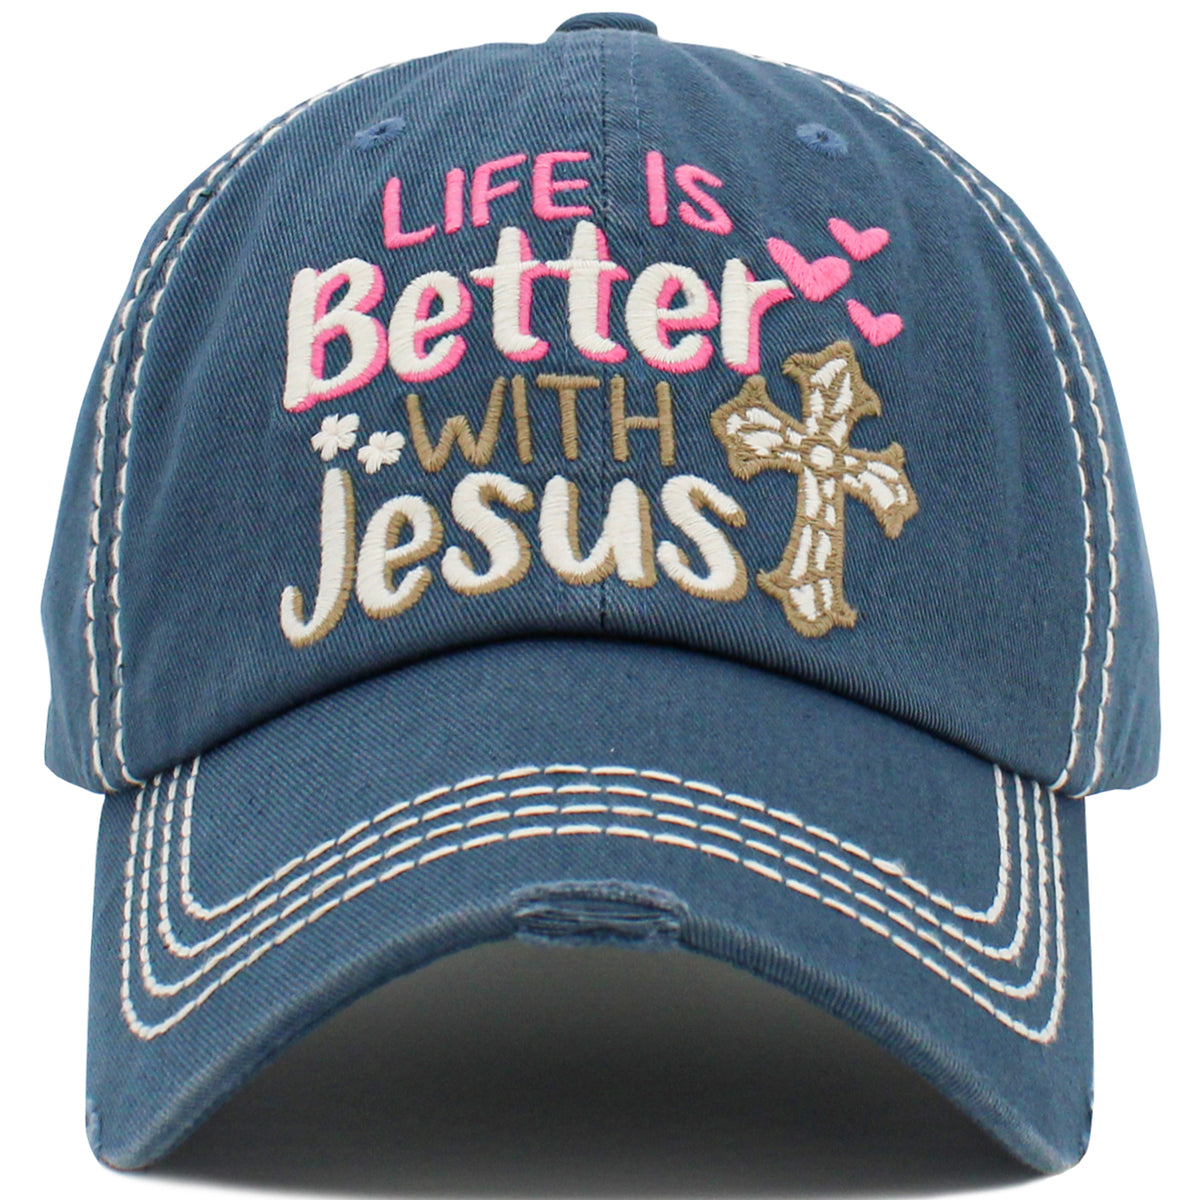 1470 - Life is Better With Jesus Hat